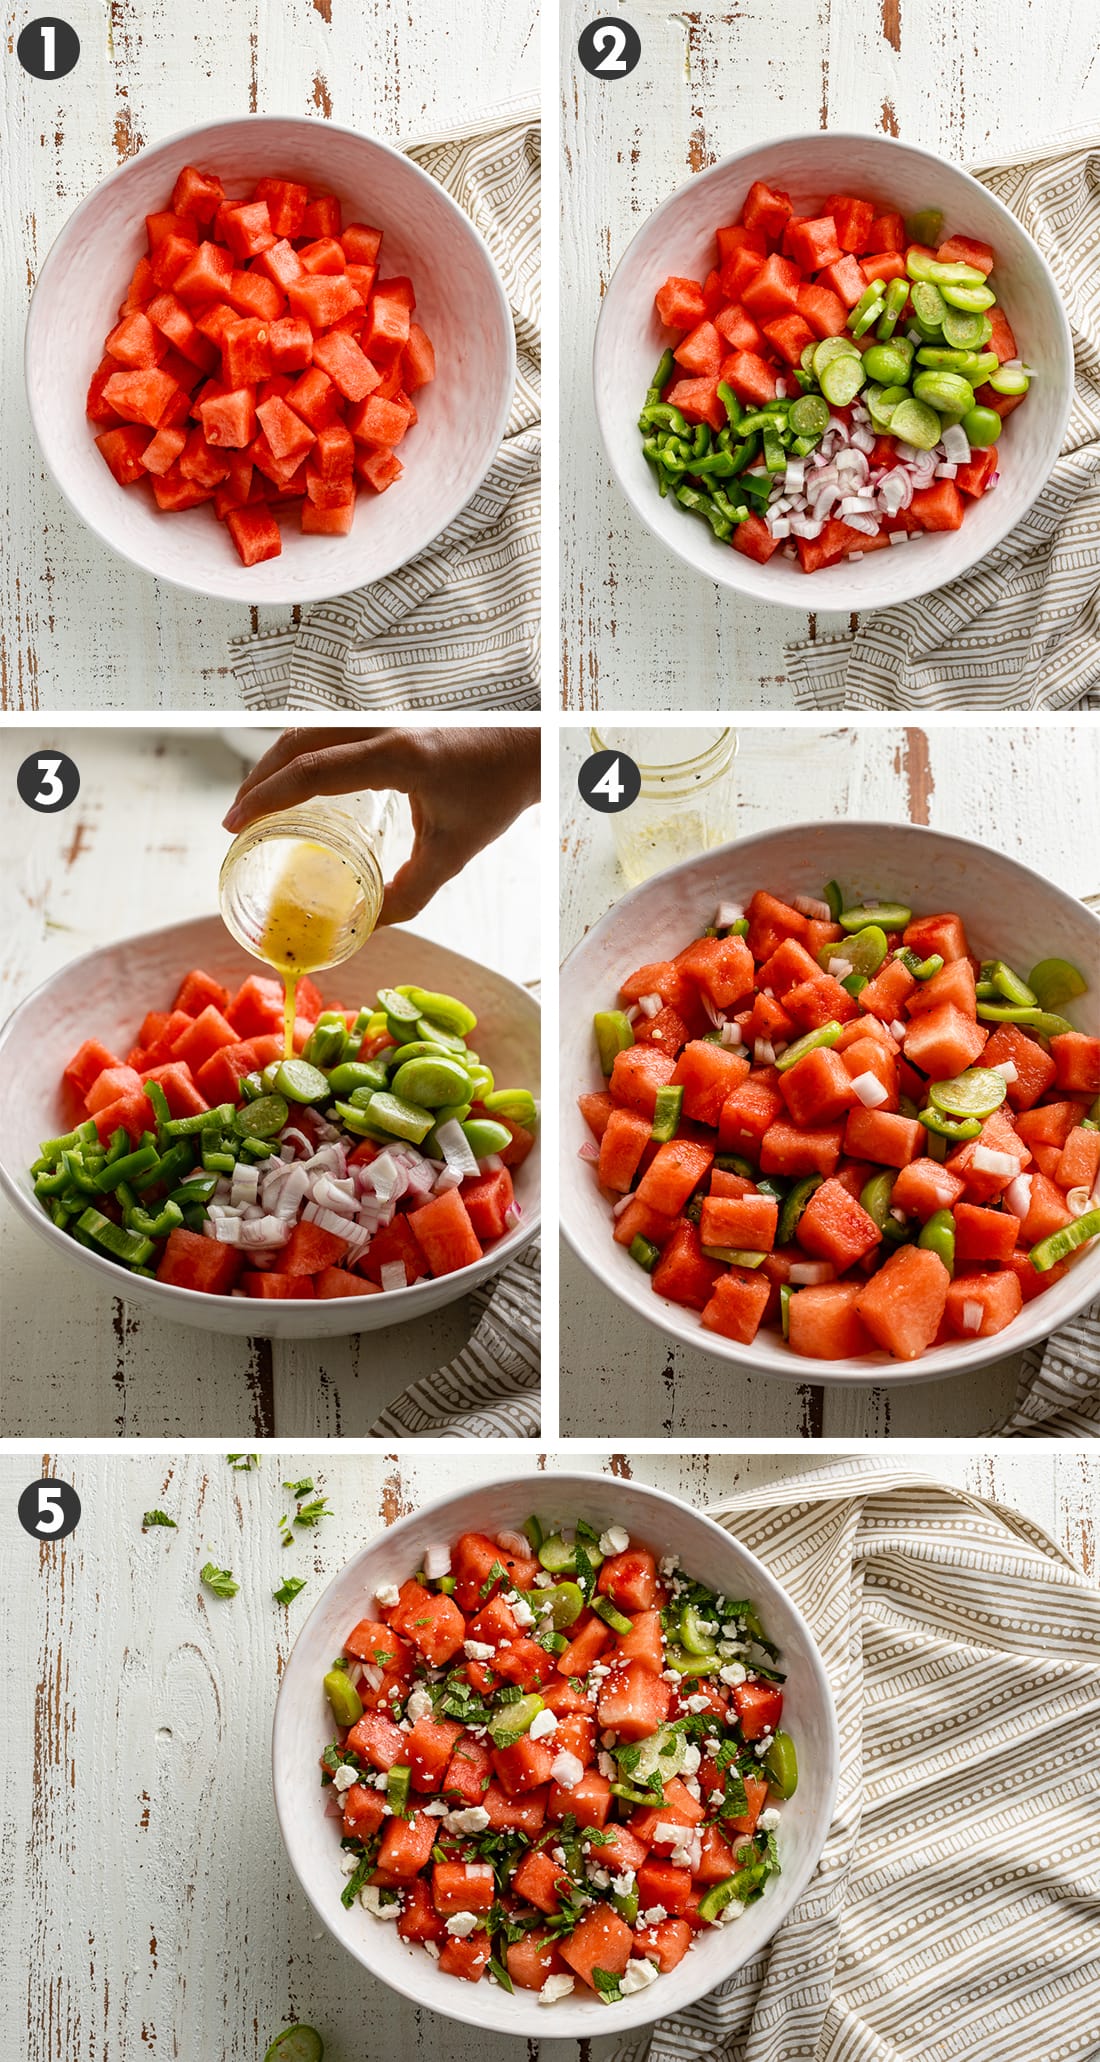 Step-by-step photos showing how to assemble a chilled watermelon salad.